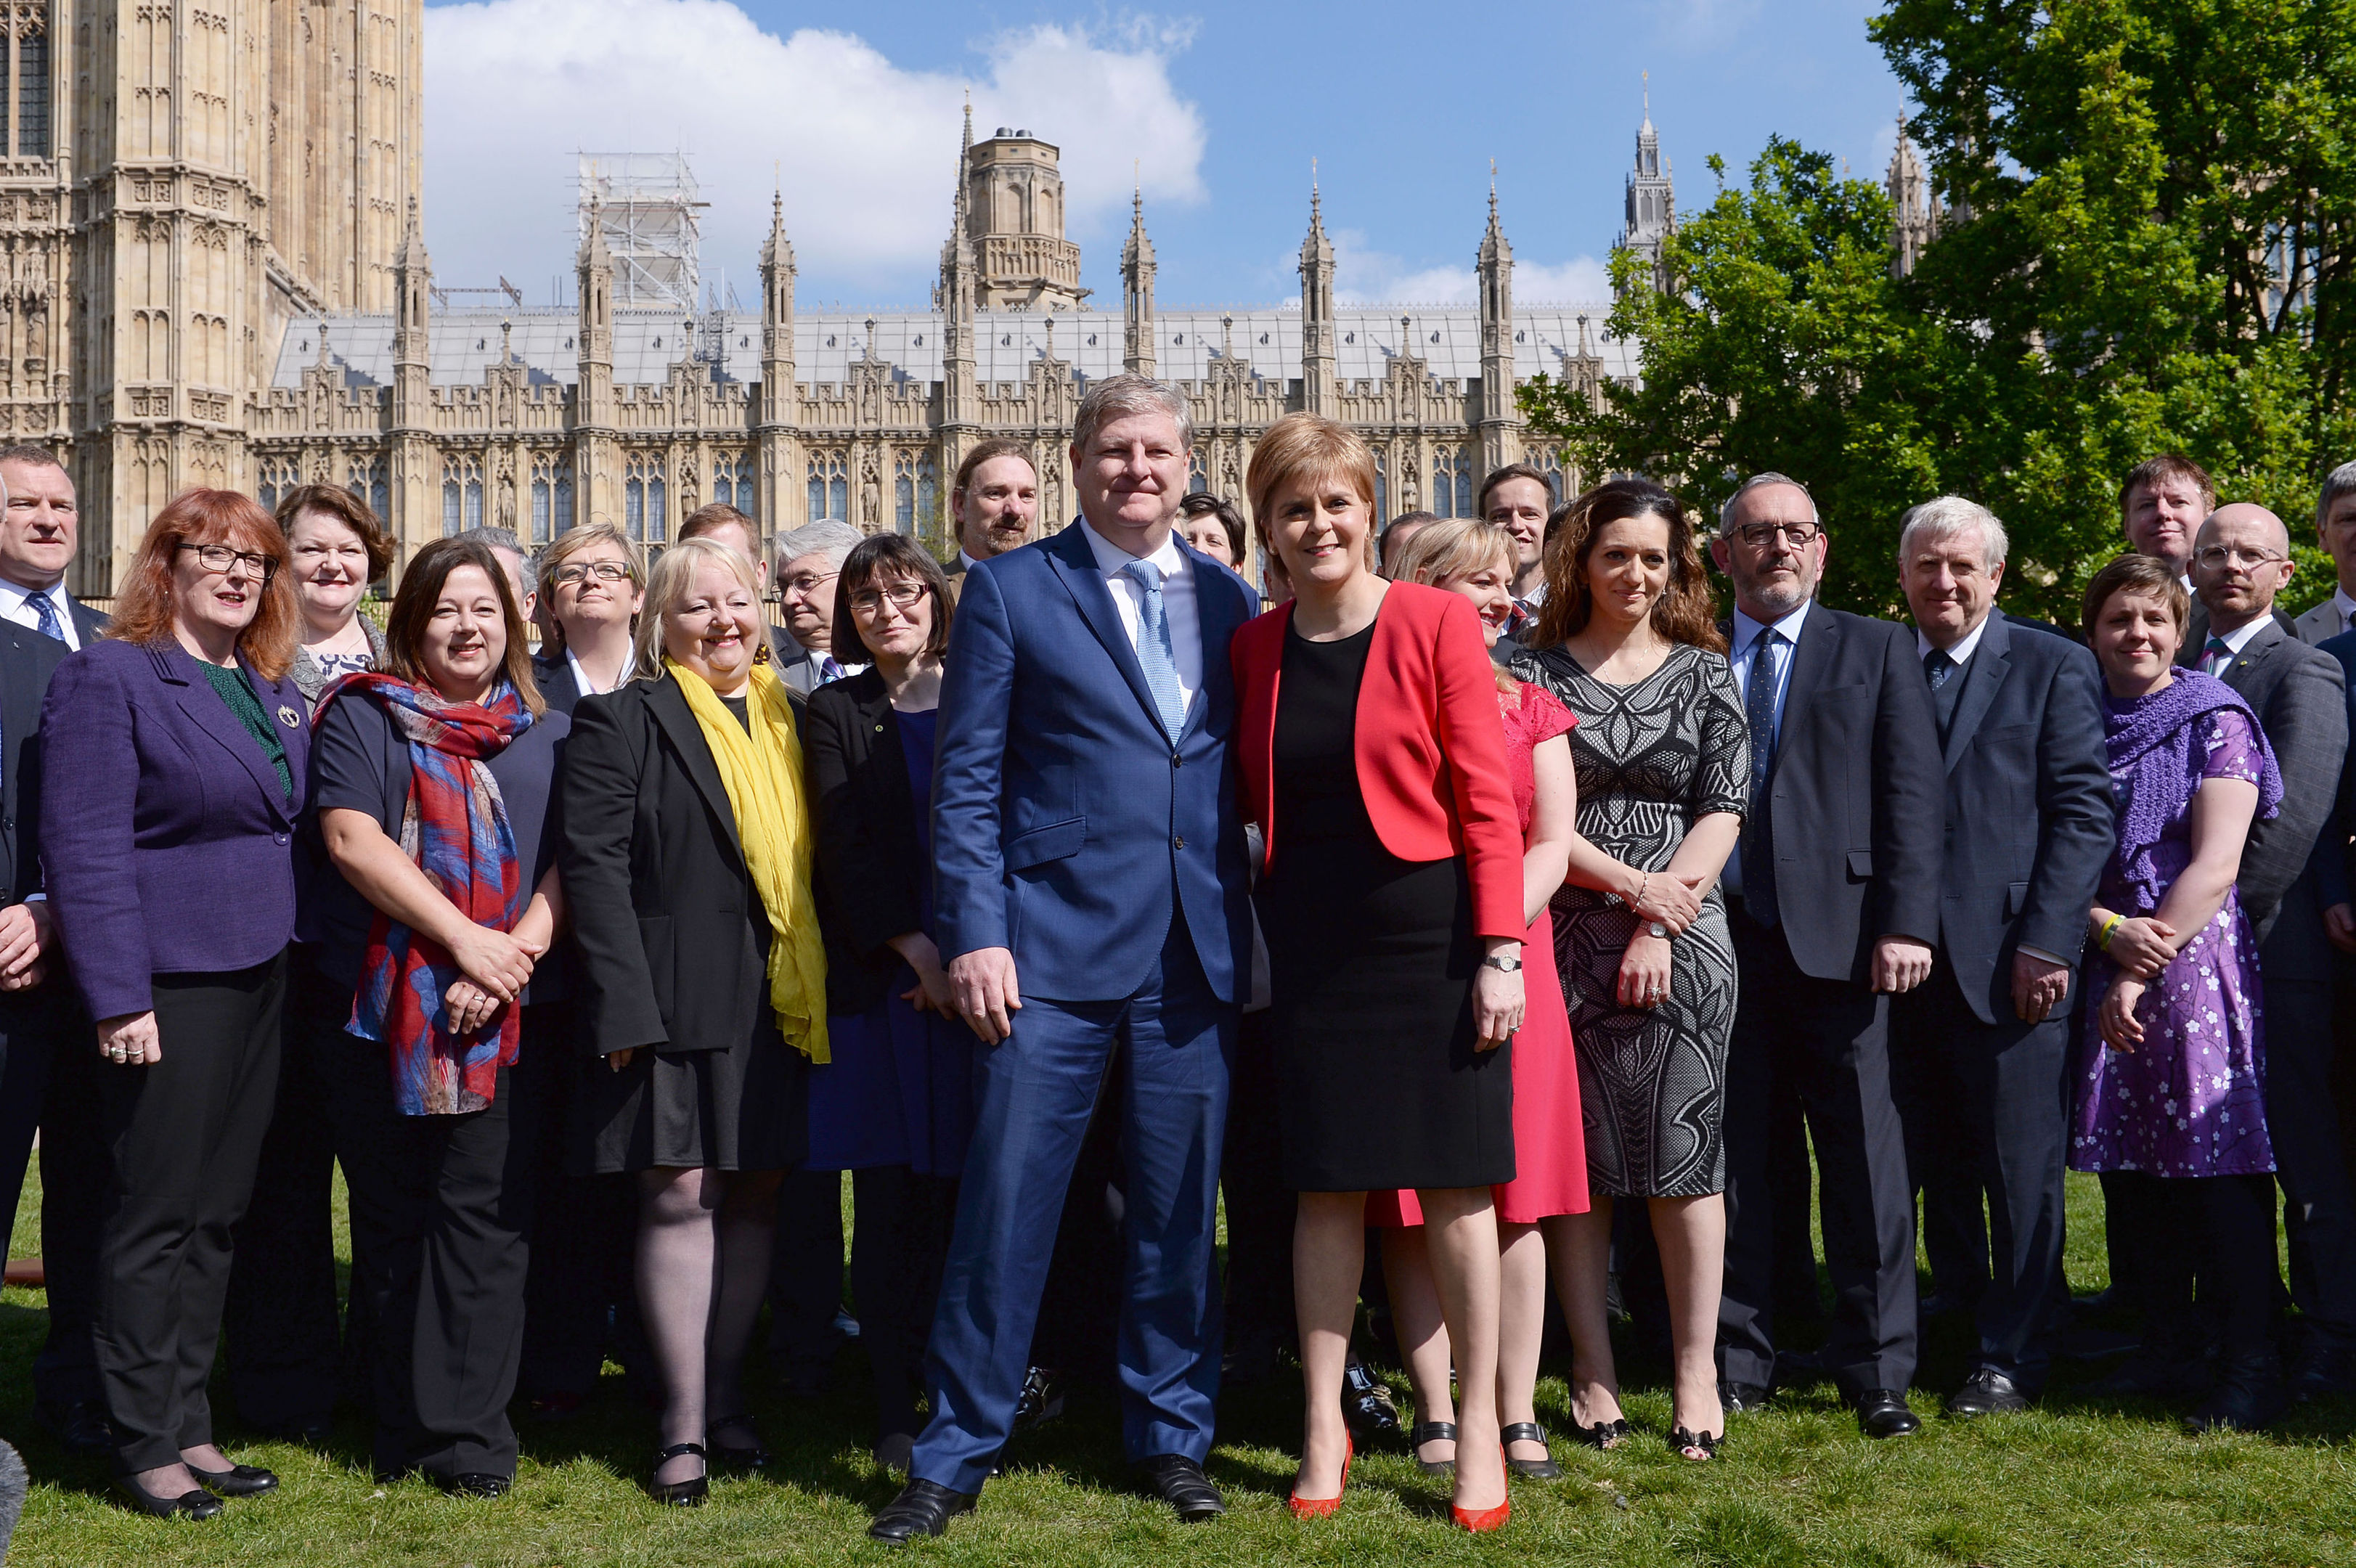 Scotland's First Minister and SNP leader Nicola Sturgeon and the party's Westminster leader Angus Robertson at a photo call with SNP MPs outside the Houses of Parliament in London, following the announcement of a snap general election. (Stefan Rousseau/PA Wire)